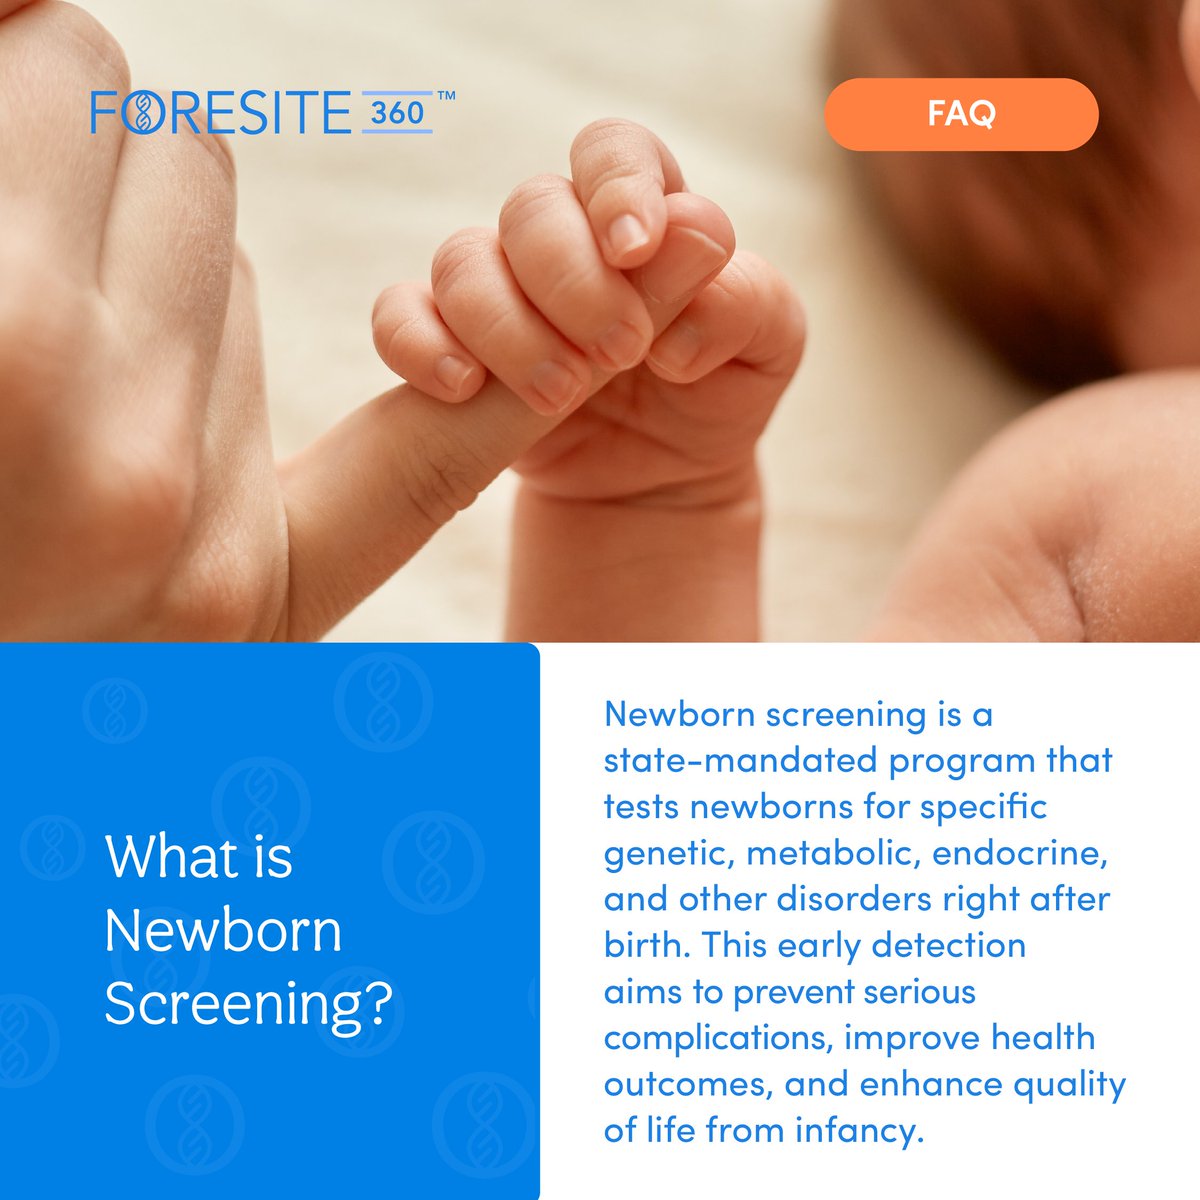 Early detection through newborn screening can make a world of difference in a child's life, allowing for interventions that improve #health and quality of life right from the start. 

#NewbornScreening #DNATest #NewbornHealth #Newborn